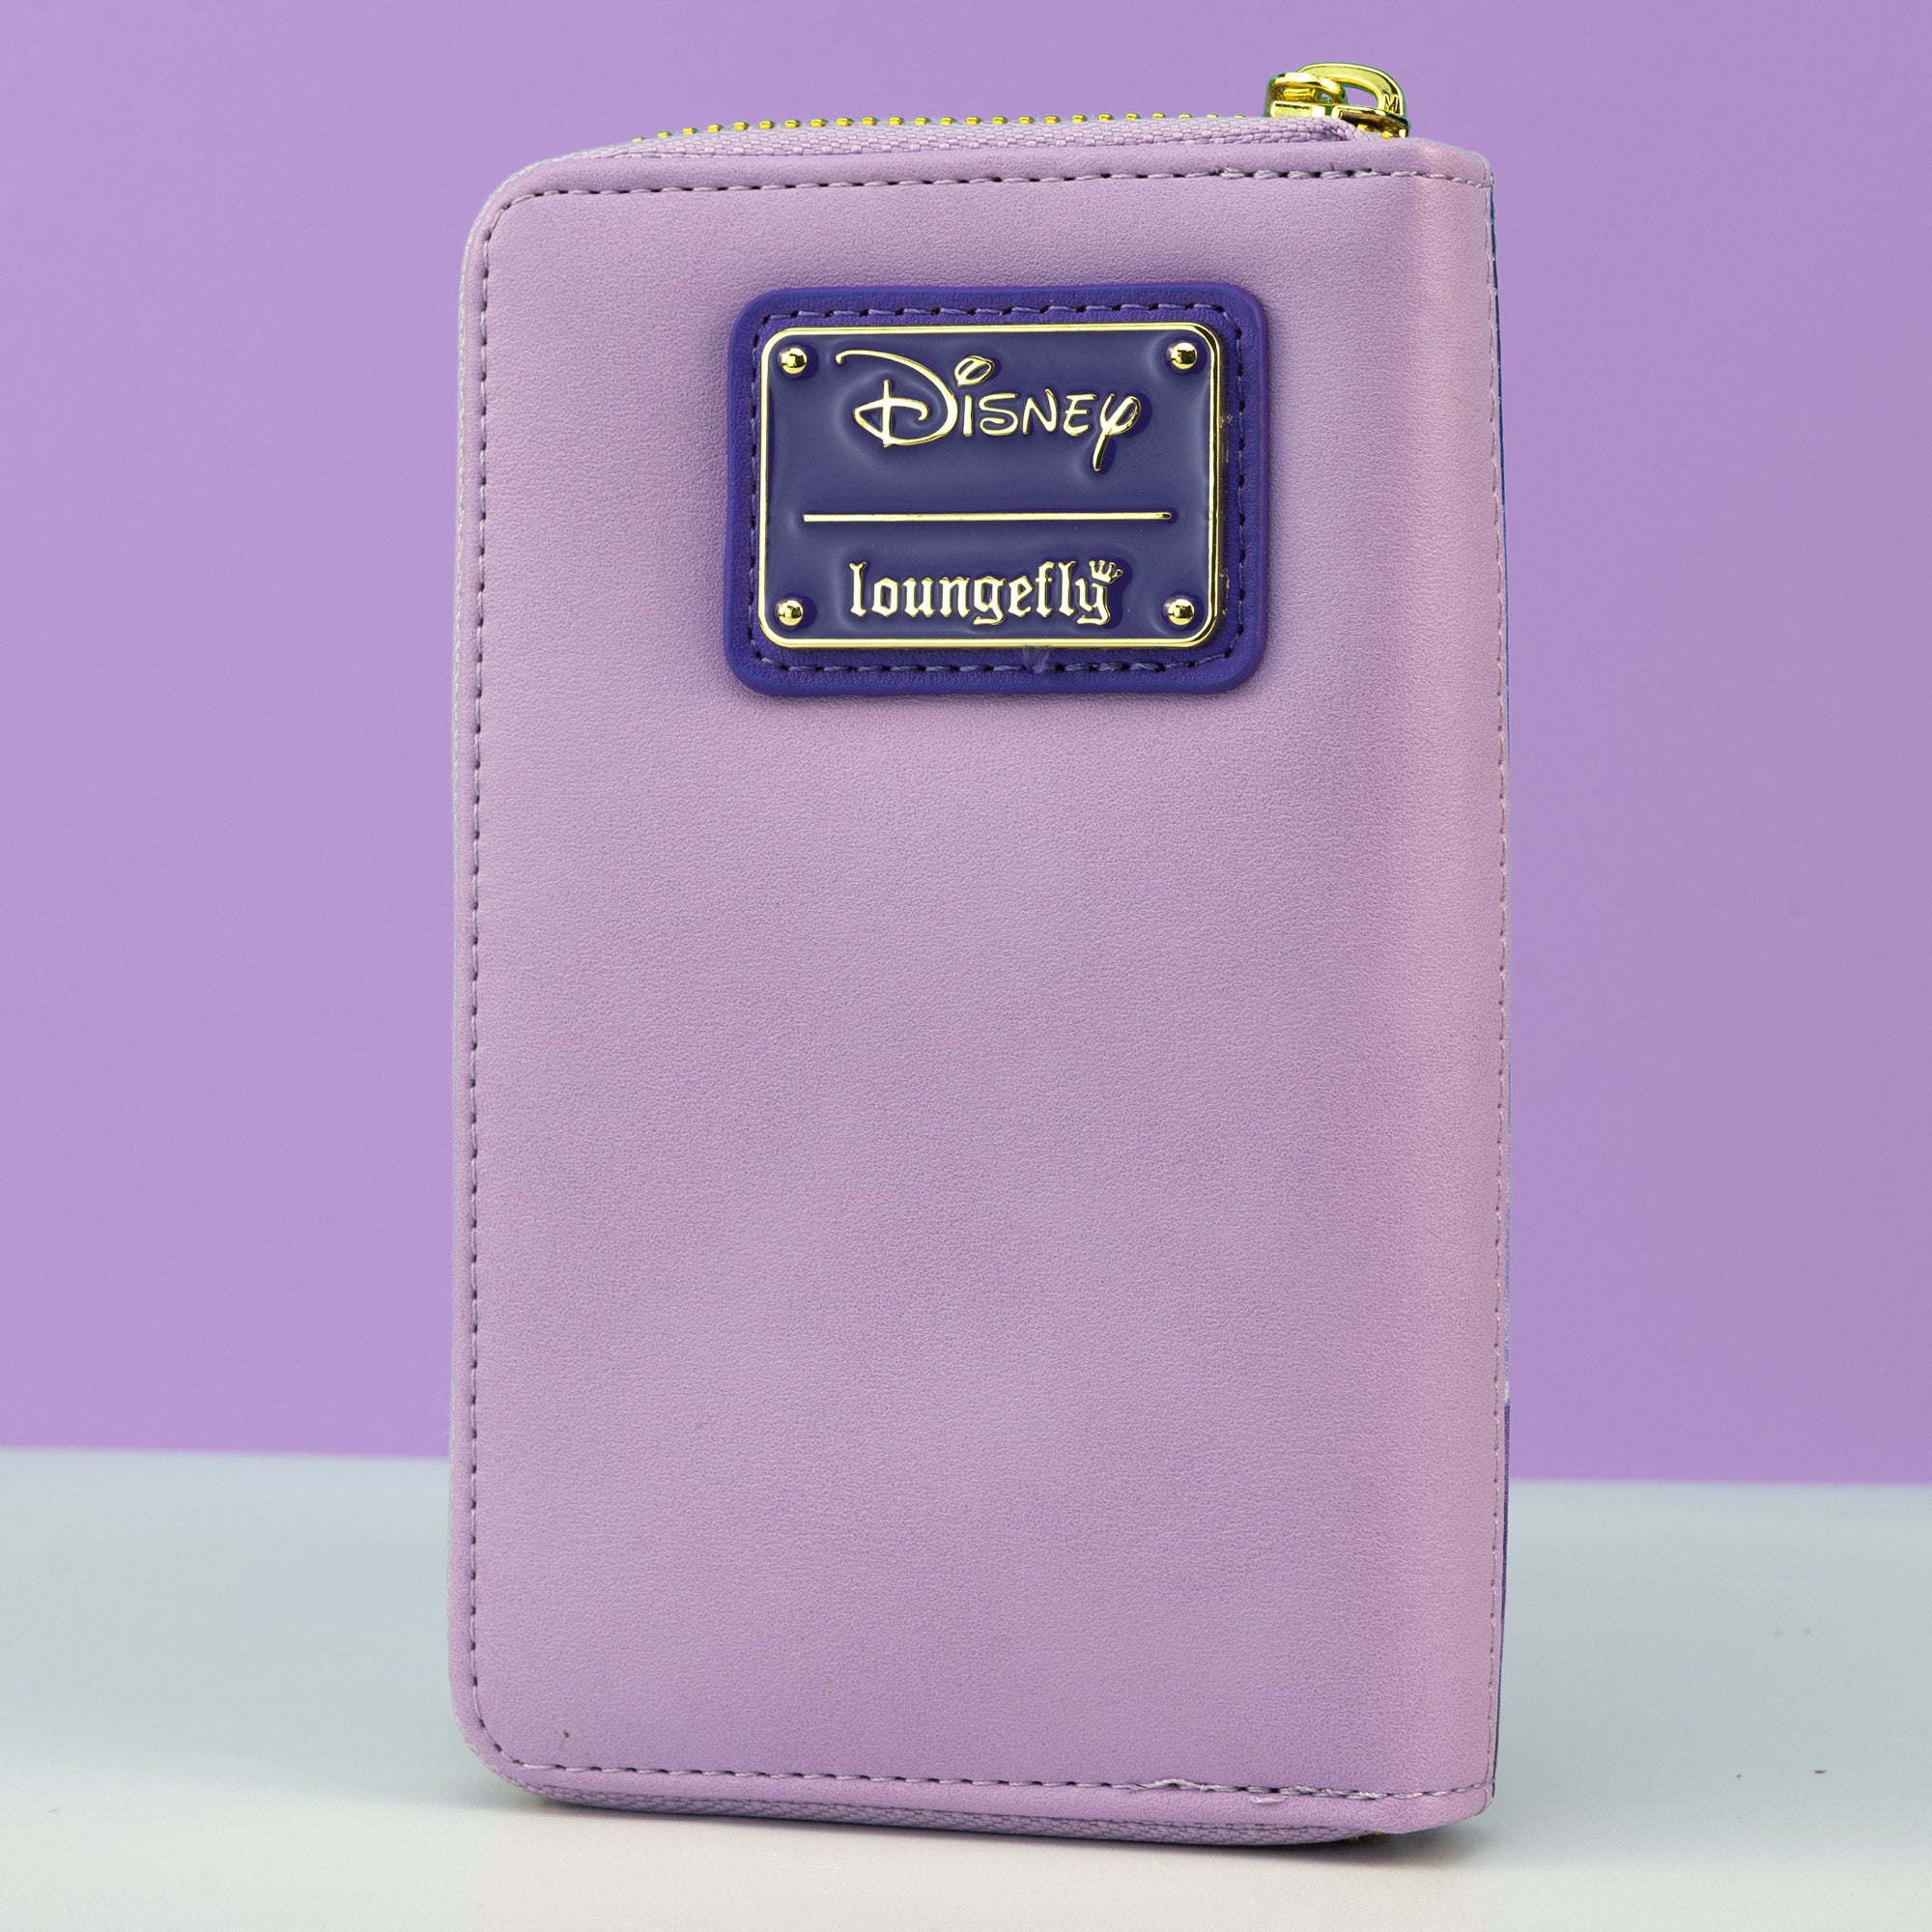 Loungefly x Disney Hercules Muses Clouds Purse